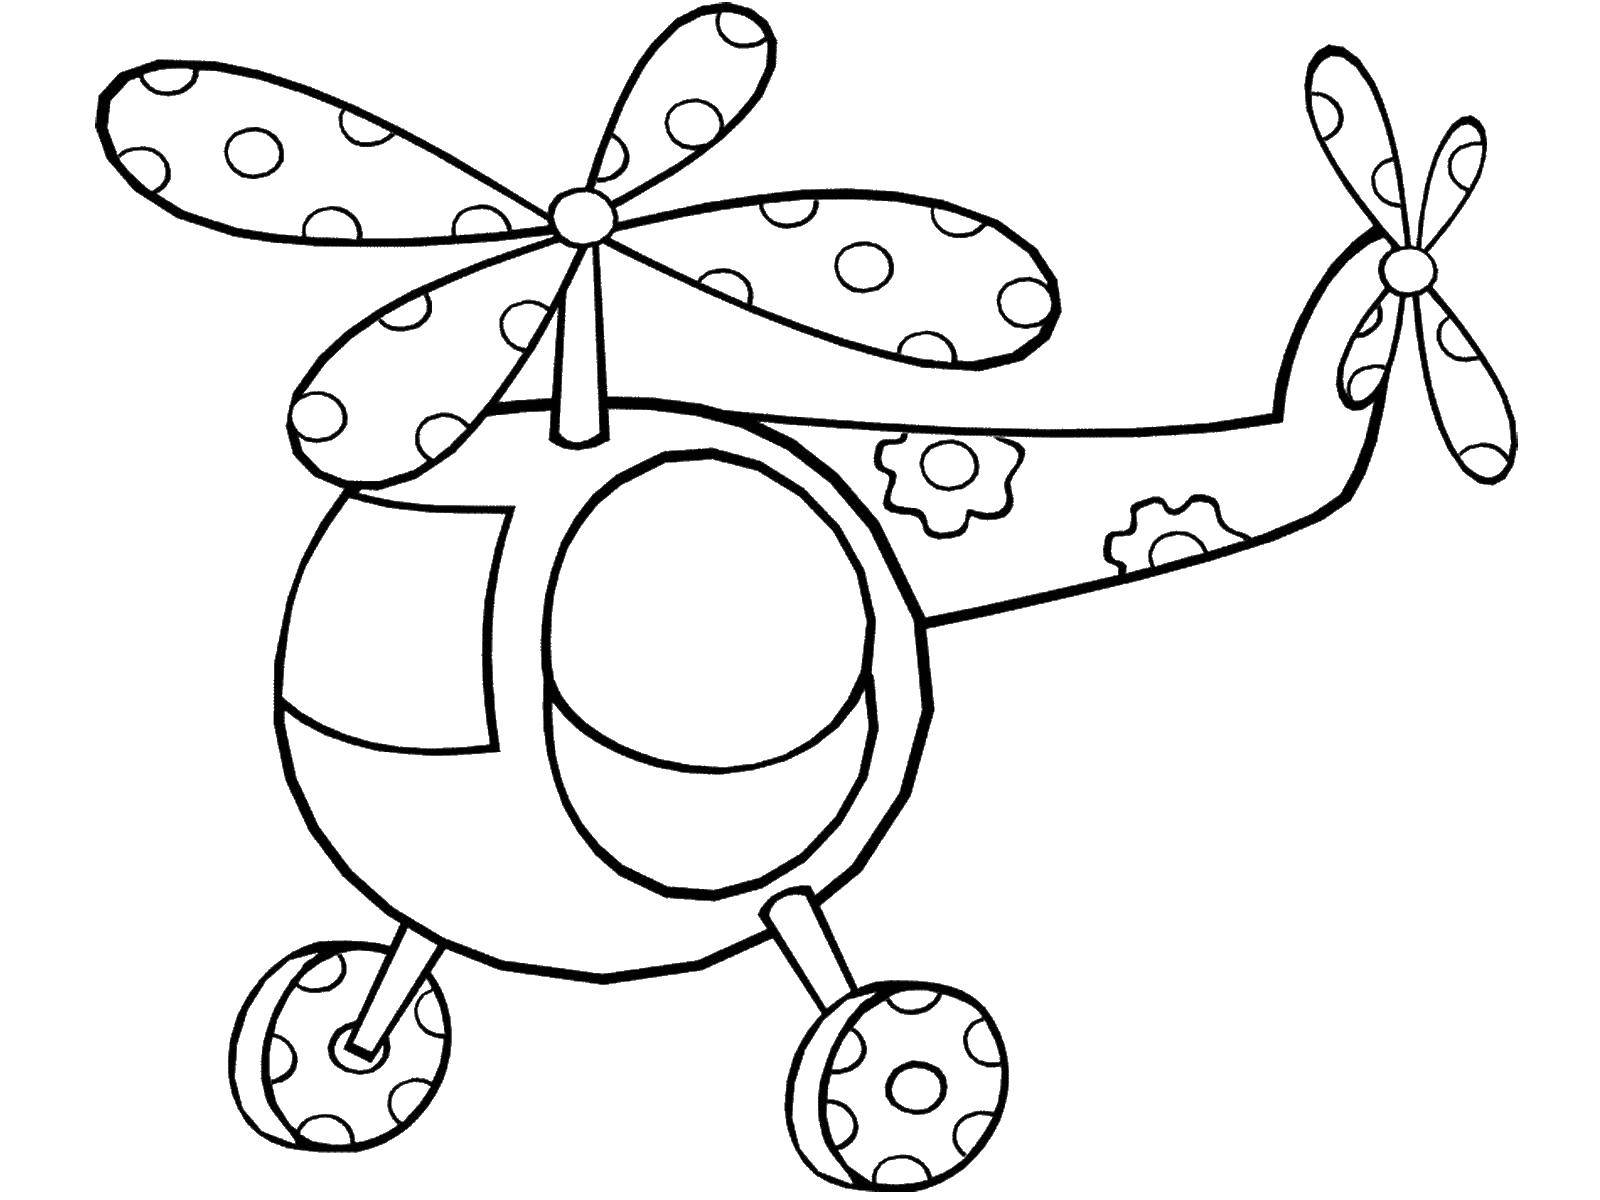 Coloring Beautiful helicopter. Category the planes. Tags:  airplane, helicopter.